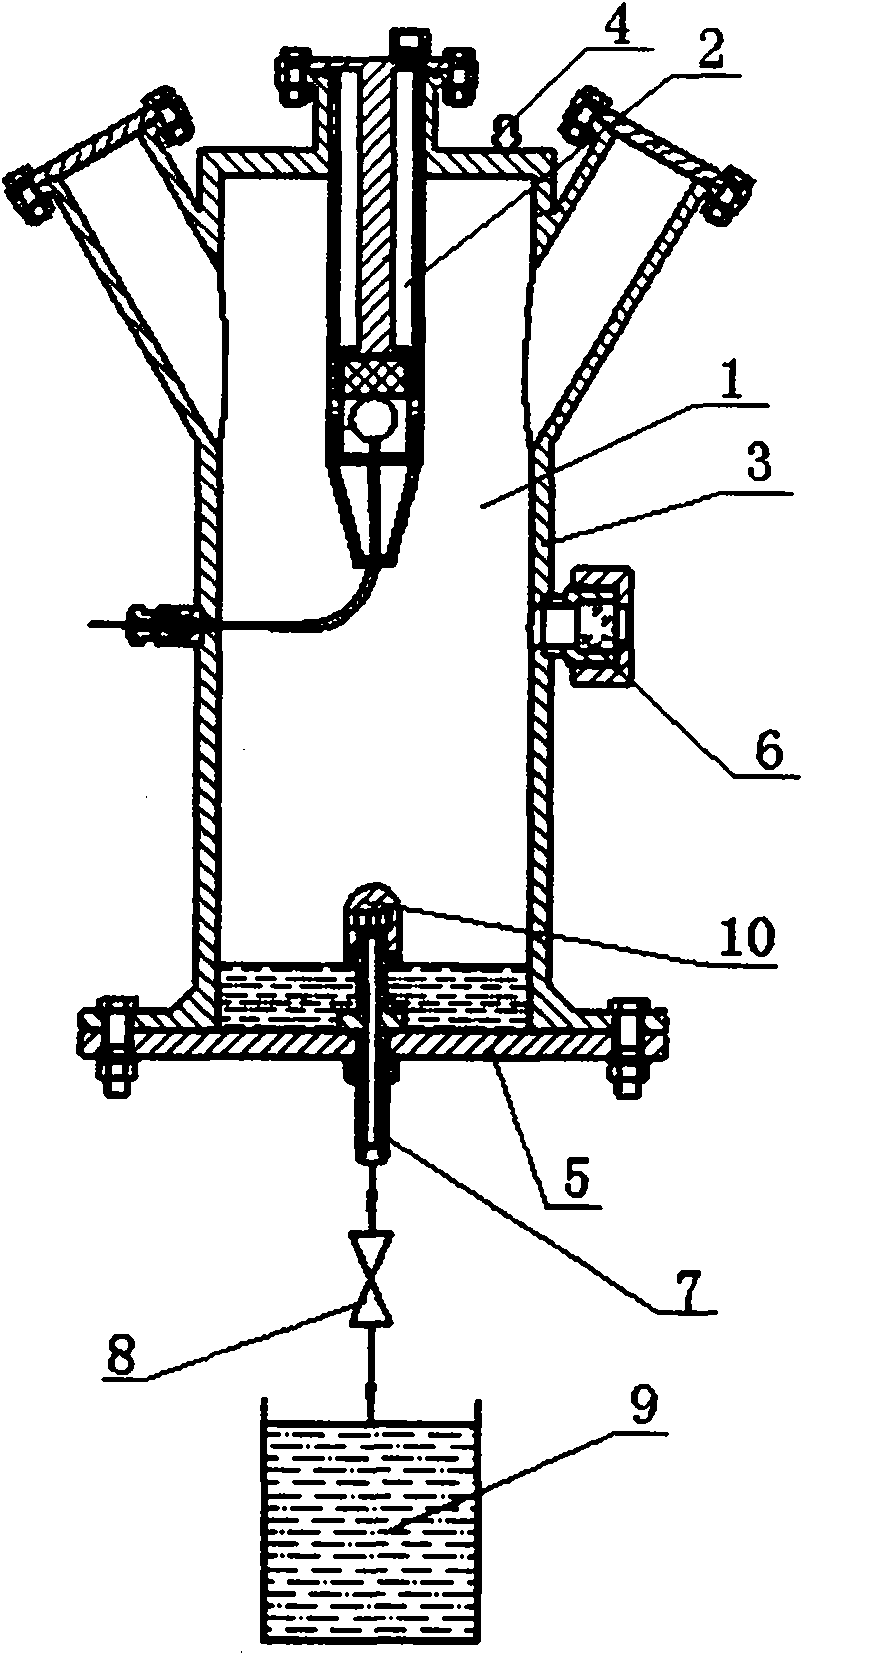 Test device for researching condensed phase particle collision discipline